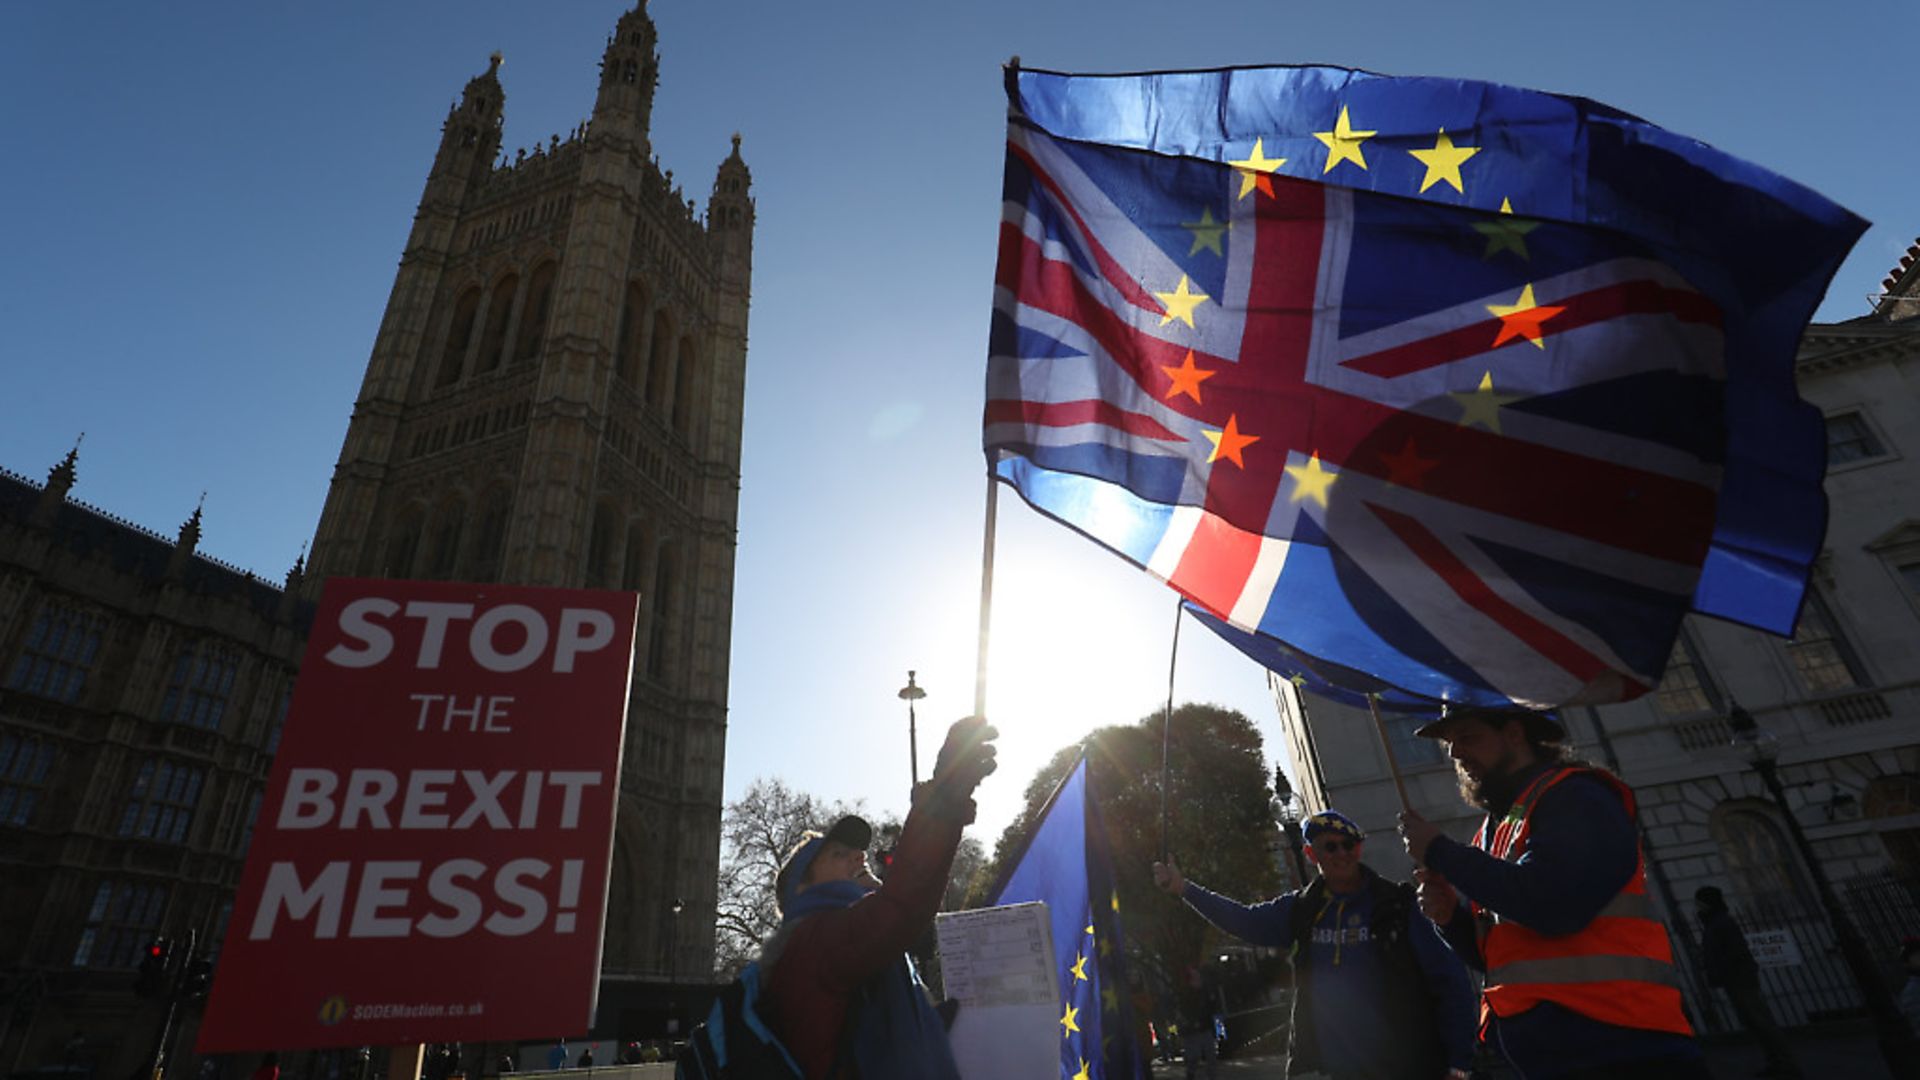 Anti-Brexit campaigners wave Union and European Union flags outside the Houses of Parliament. Photograph: Jonathan Brady/PA. - Credit: PA Archive/PA Images